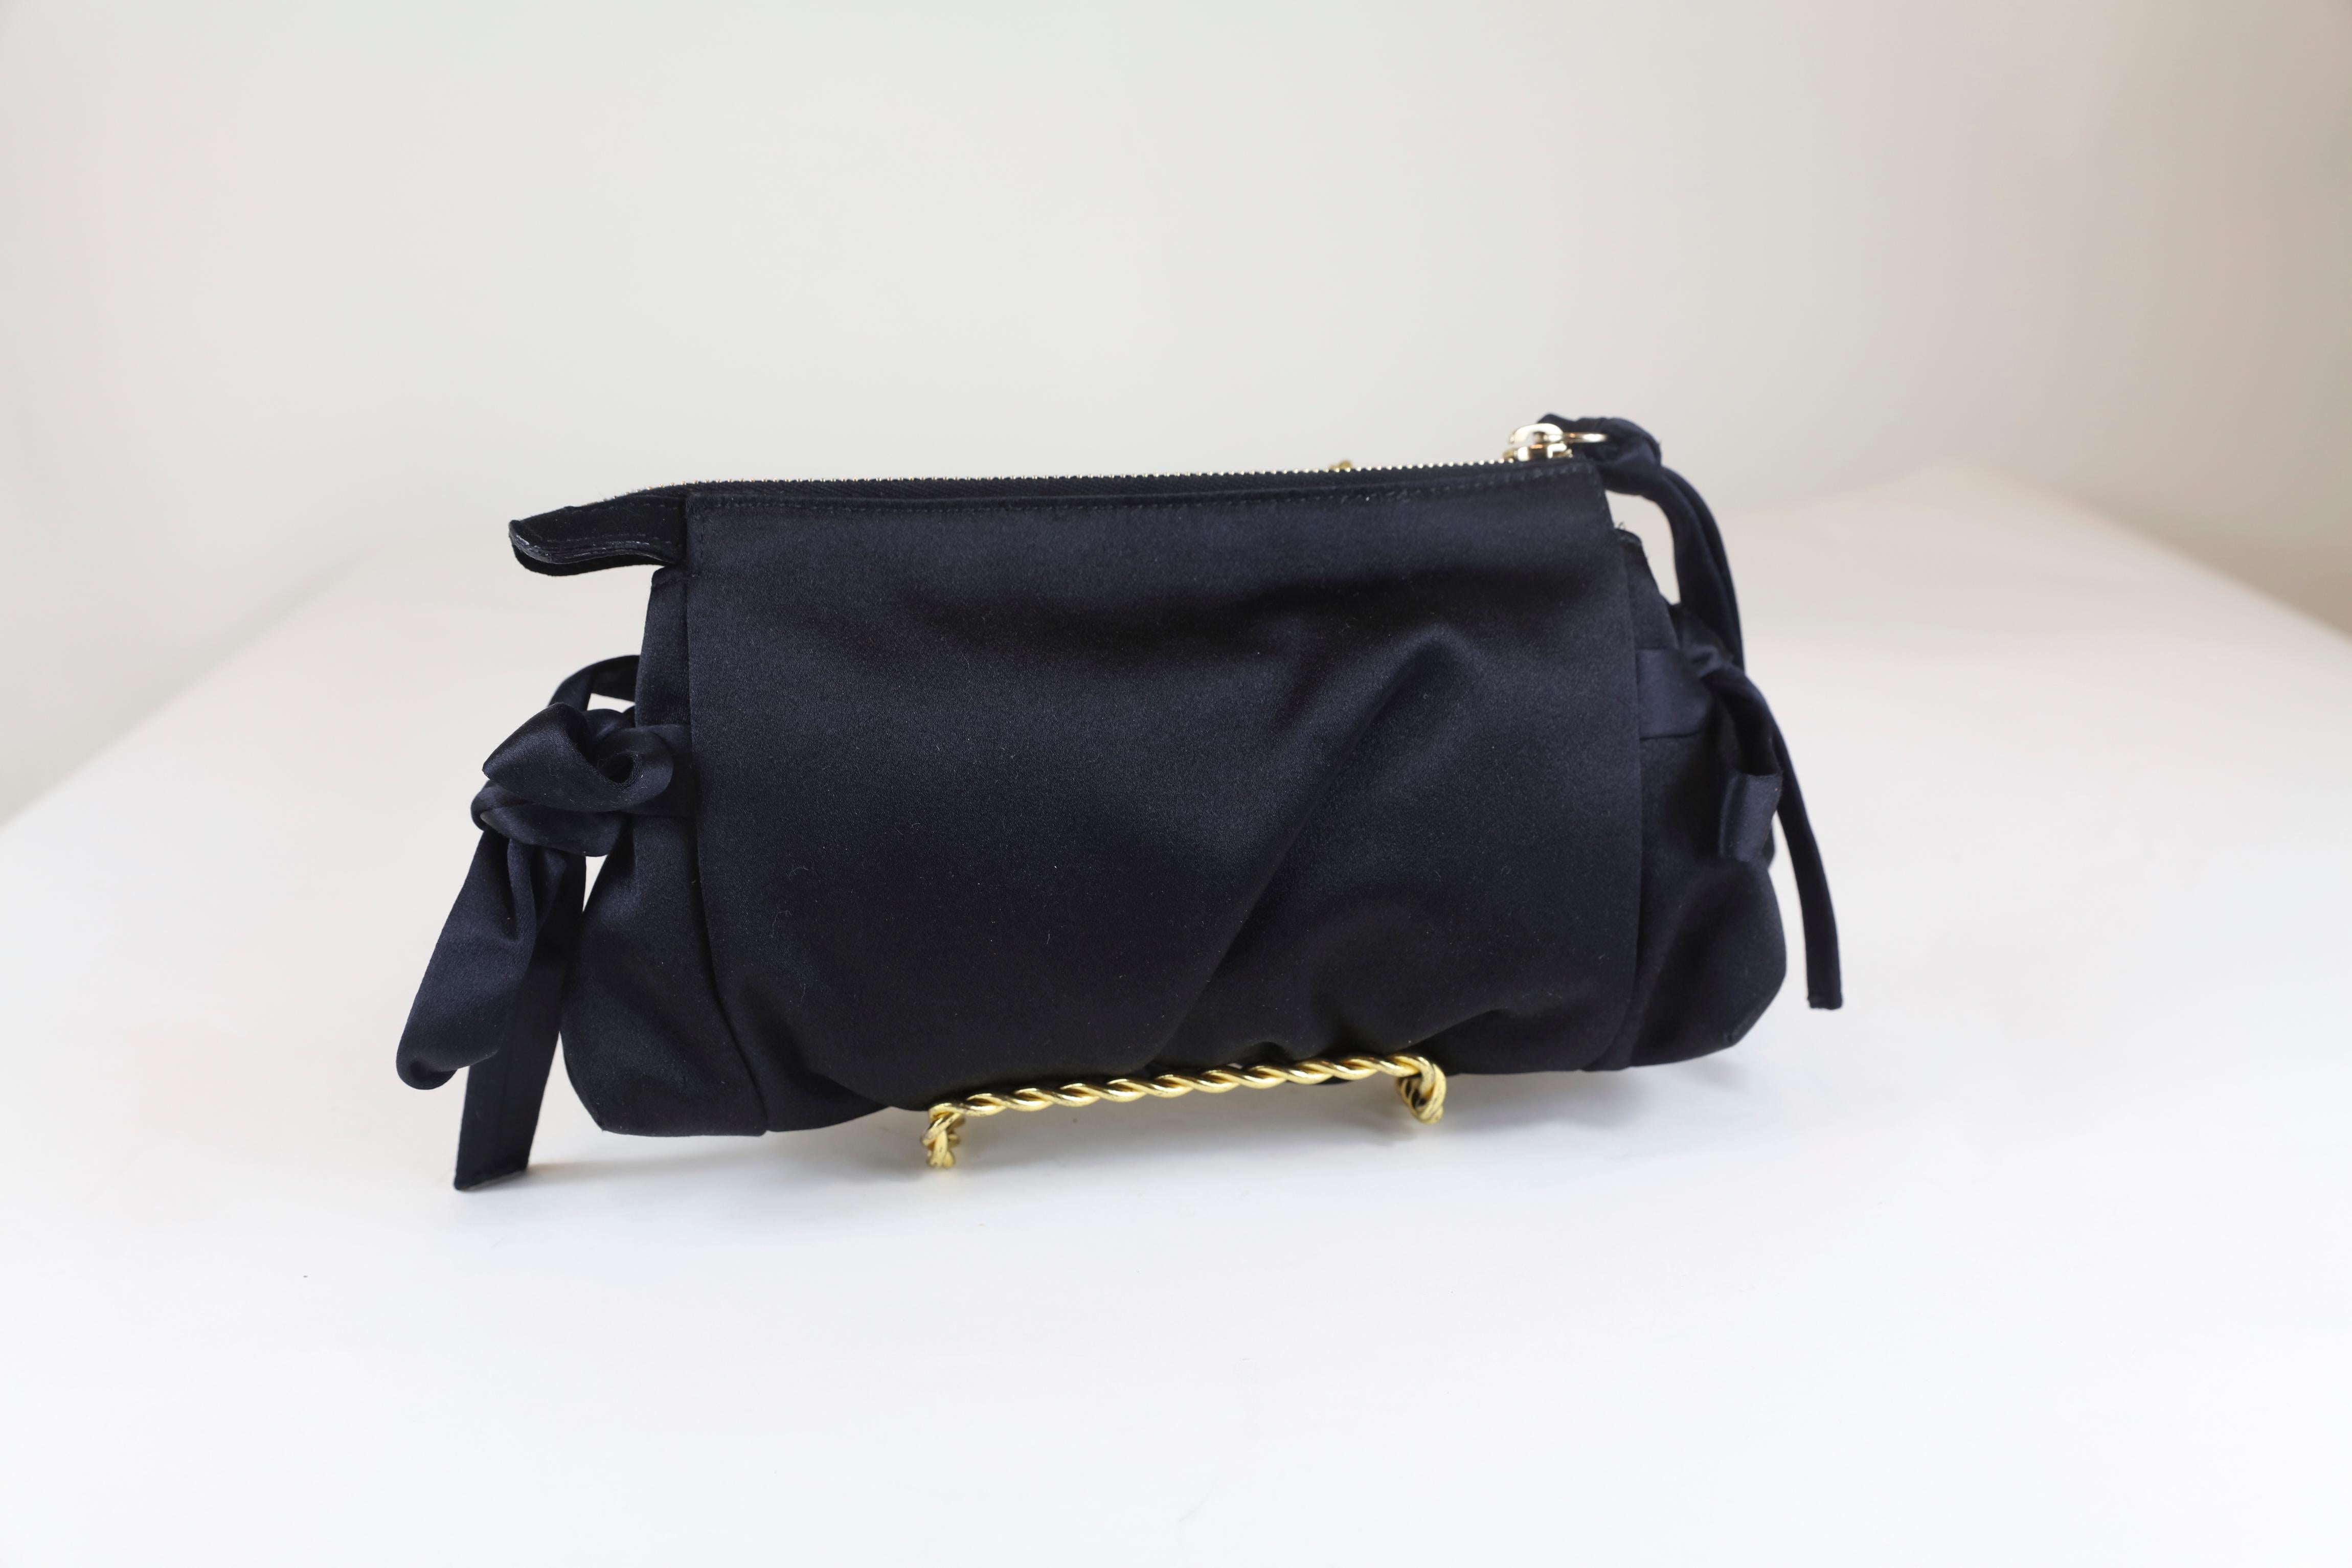 Black clutch that will go with just about anything! 
10